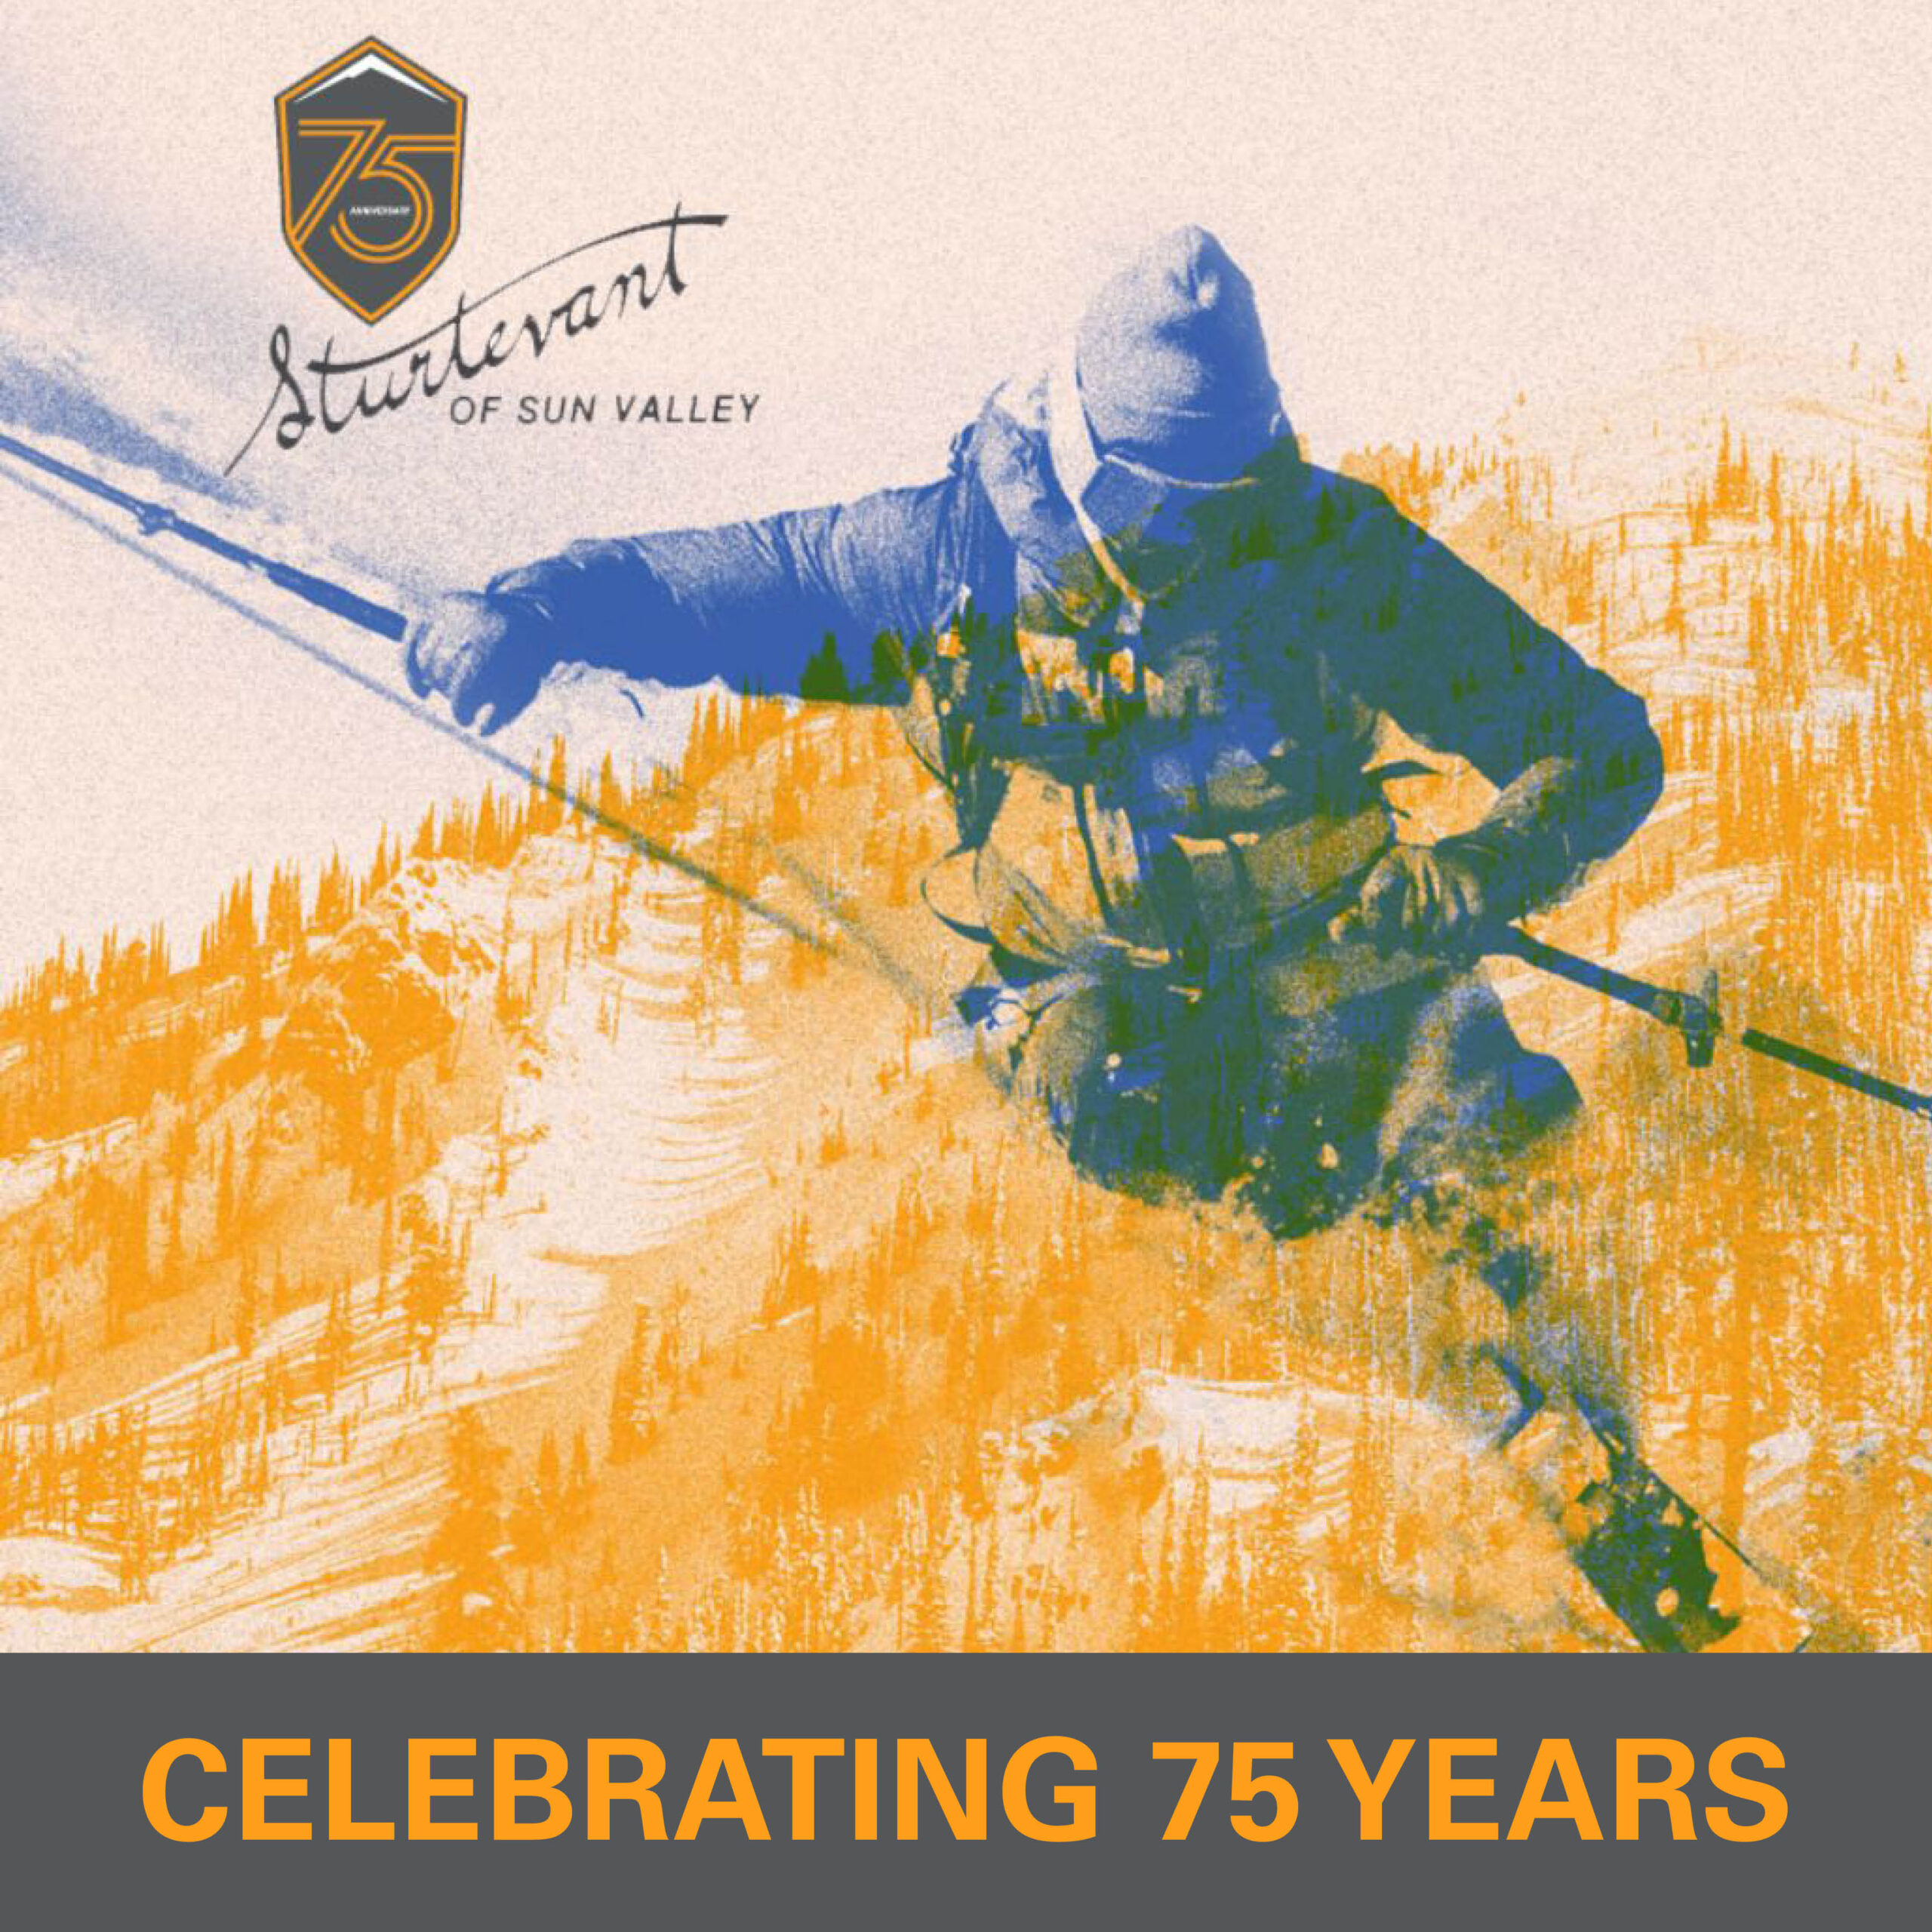 Vintage Ski Photo representing 75 years of business